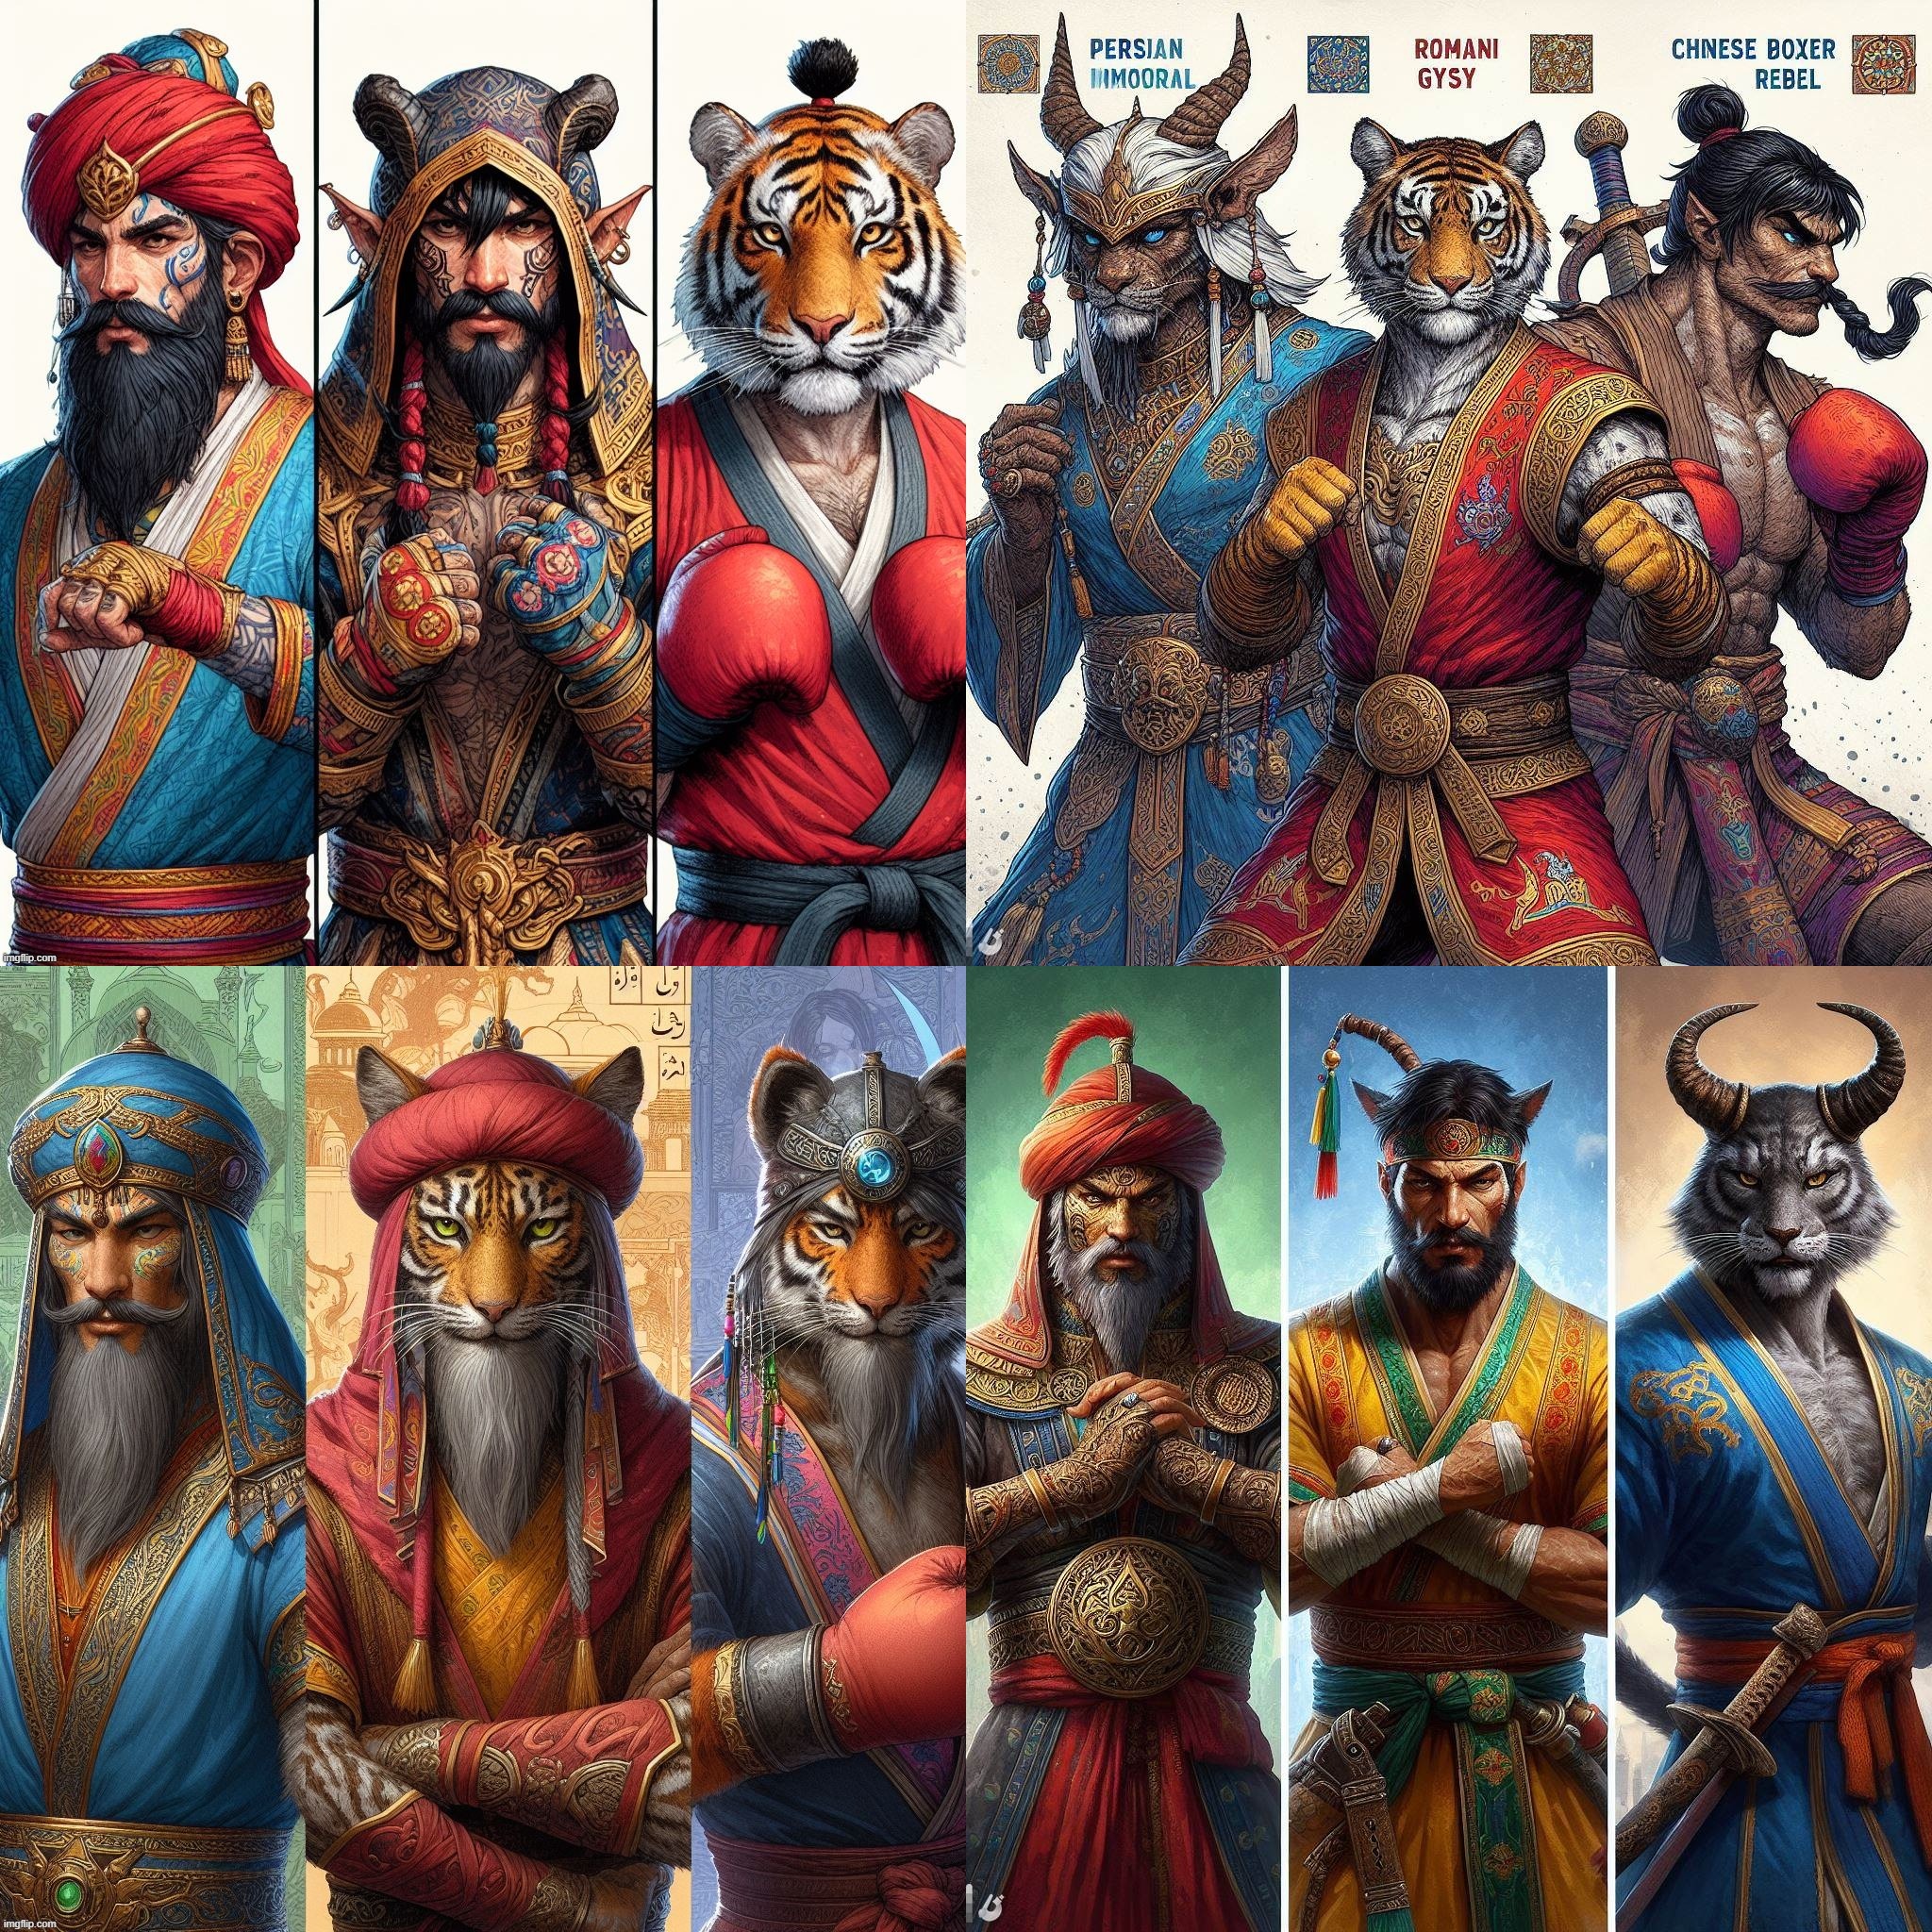 AI Bing: Khajiits as Indo Persian Immortals, Romani Gypsy, and Chinese Boxer Rebels. Mixed results. | image tagged in ai generated,elder scrolls,khajiit,gypsy,chinese boxer rebel,persian | made w/ Imgflip meme maker